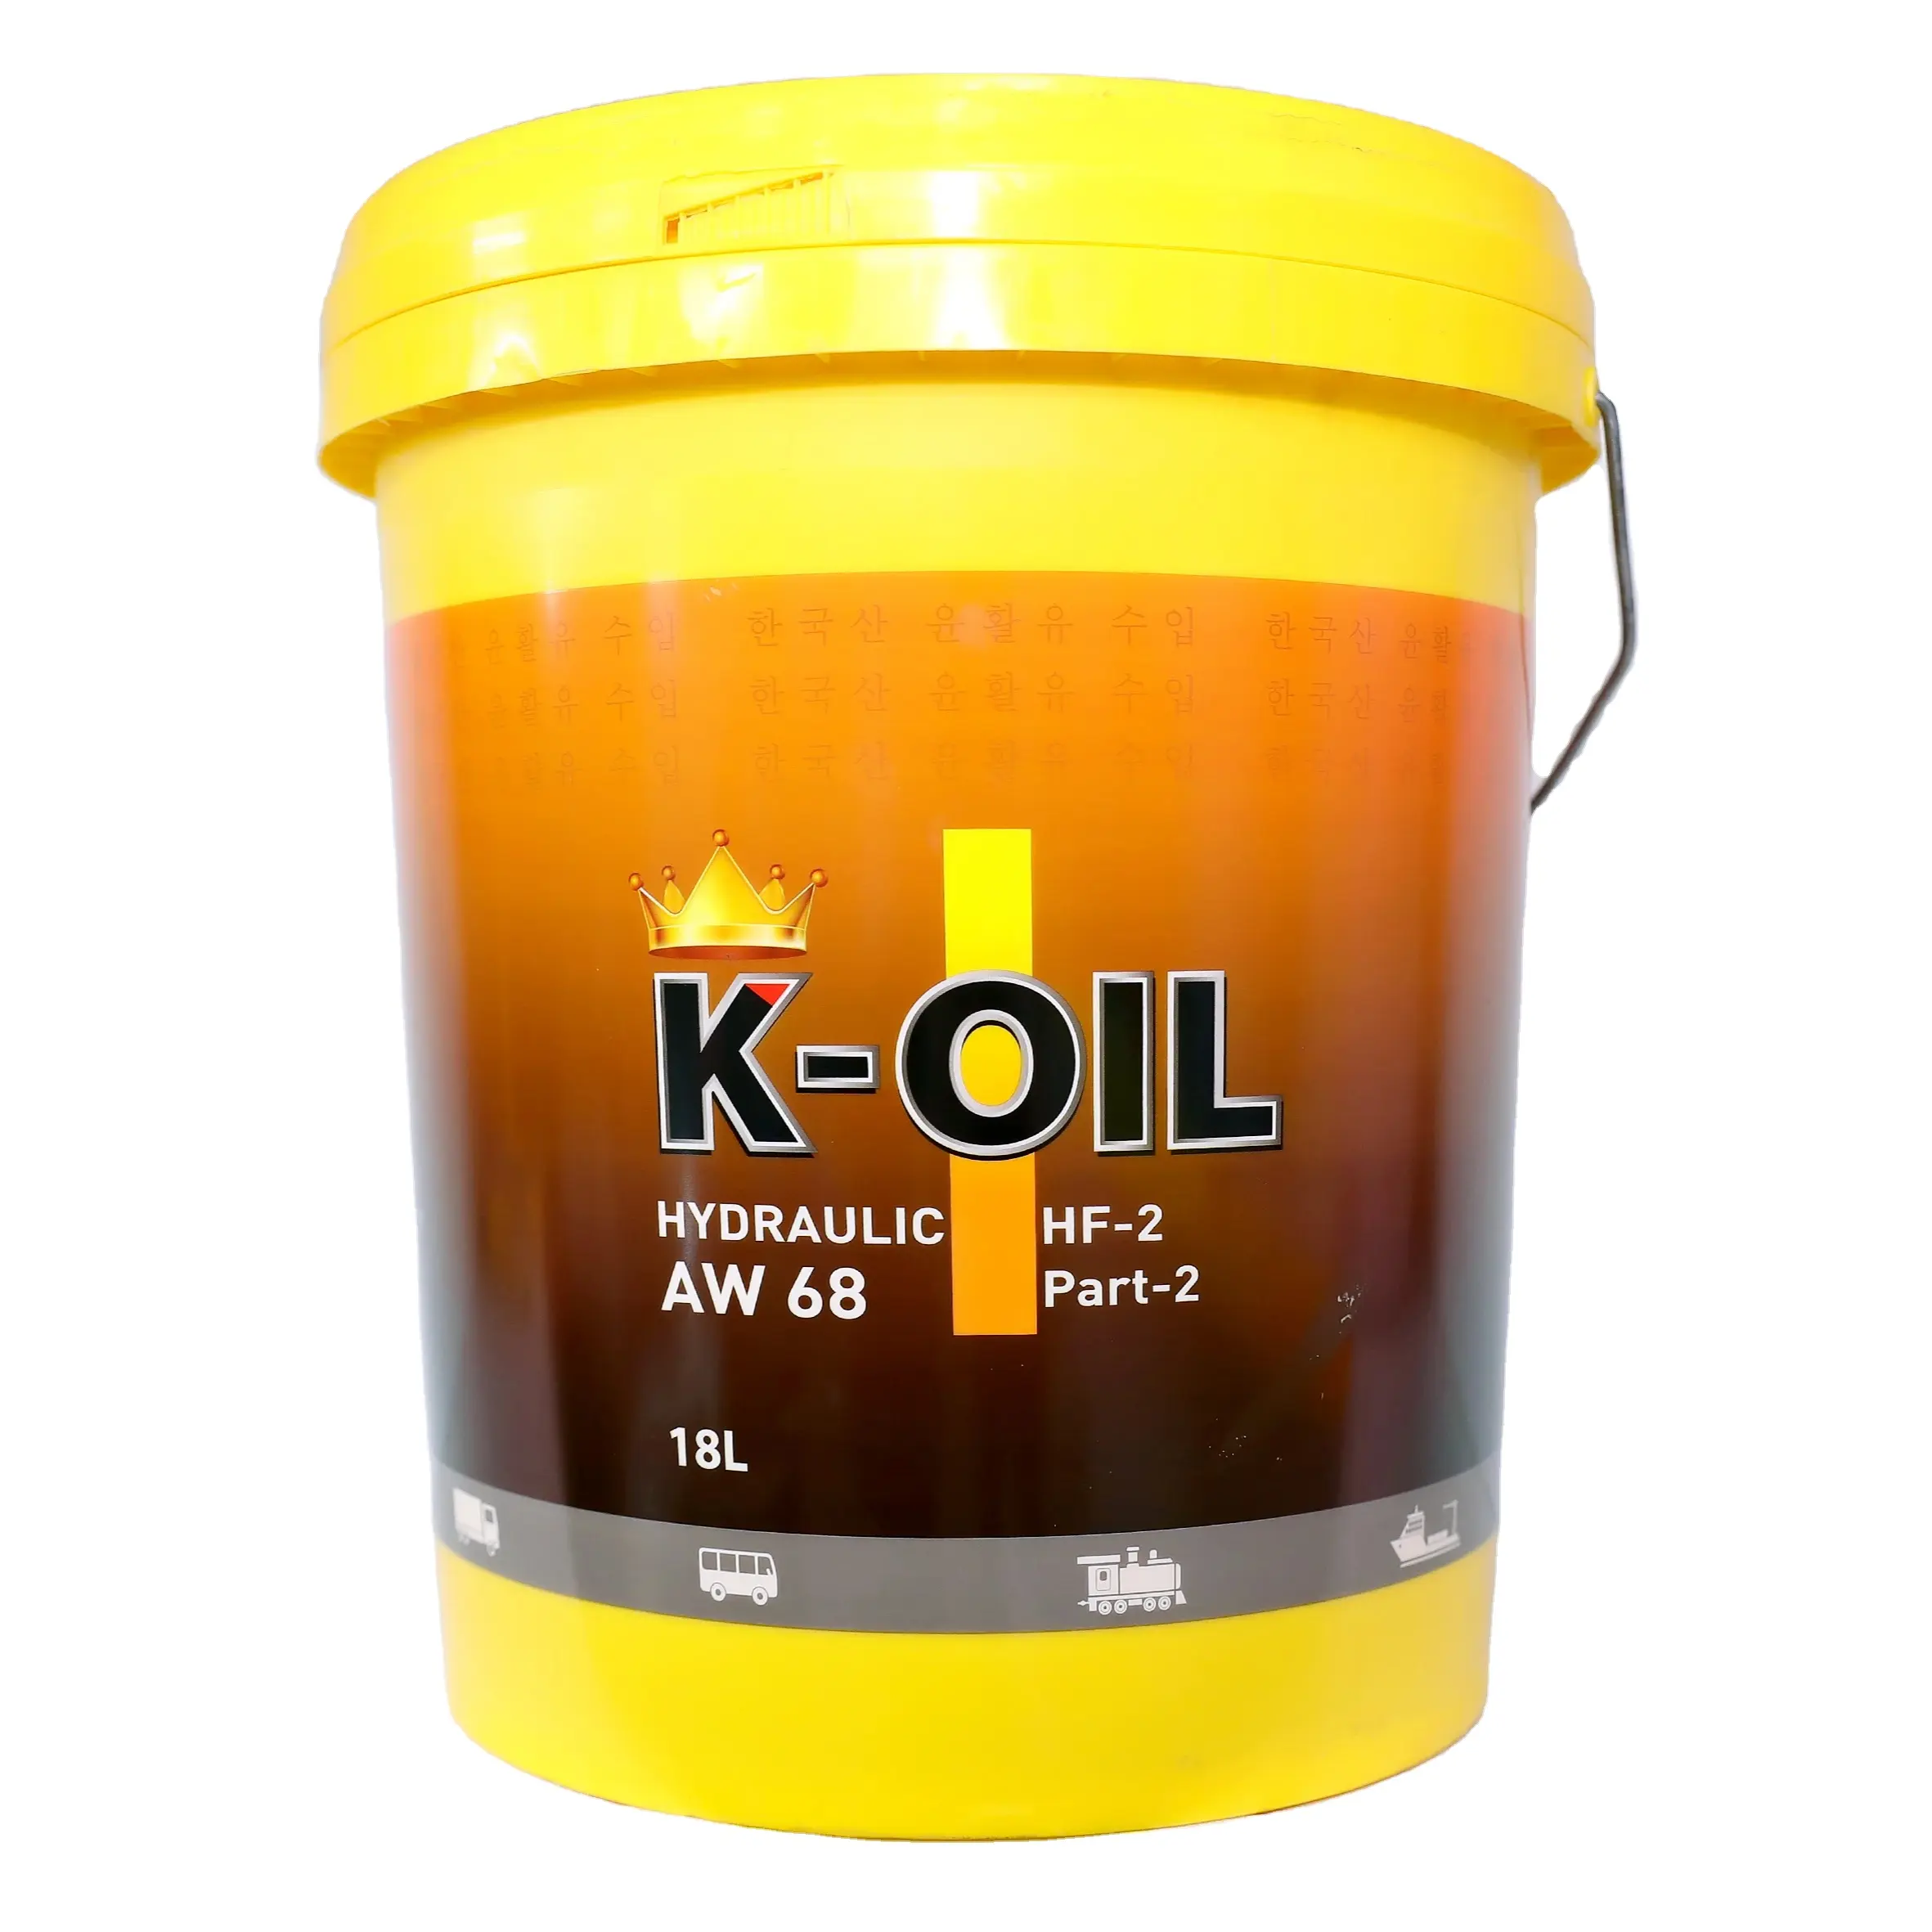 K-Oil AW68 HYDRAULIC base oil group 3 and wholesale application for factory equipment and mobile equipment, made in Vietnam